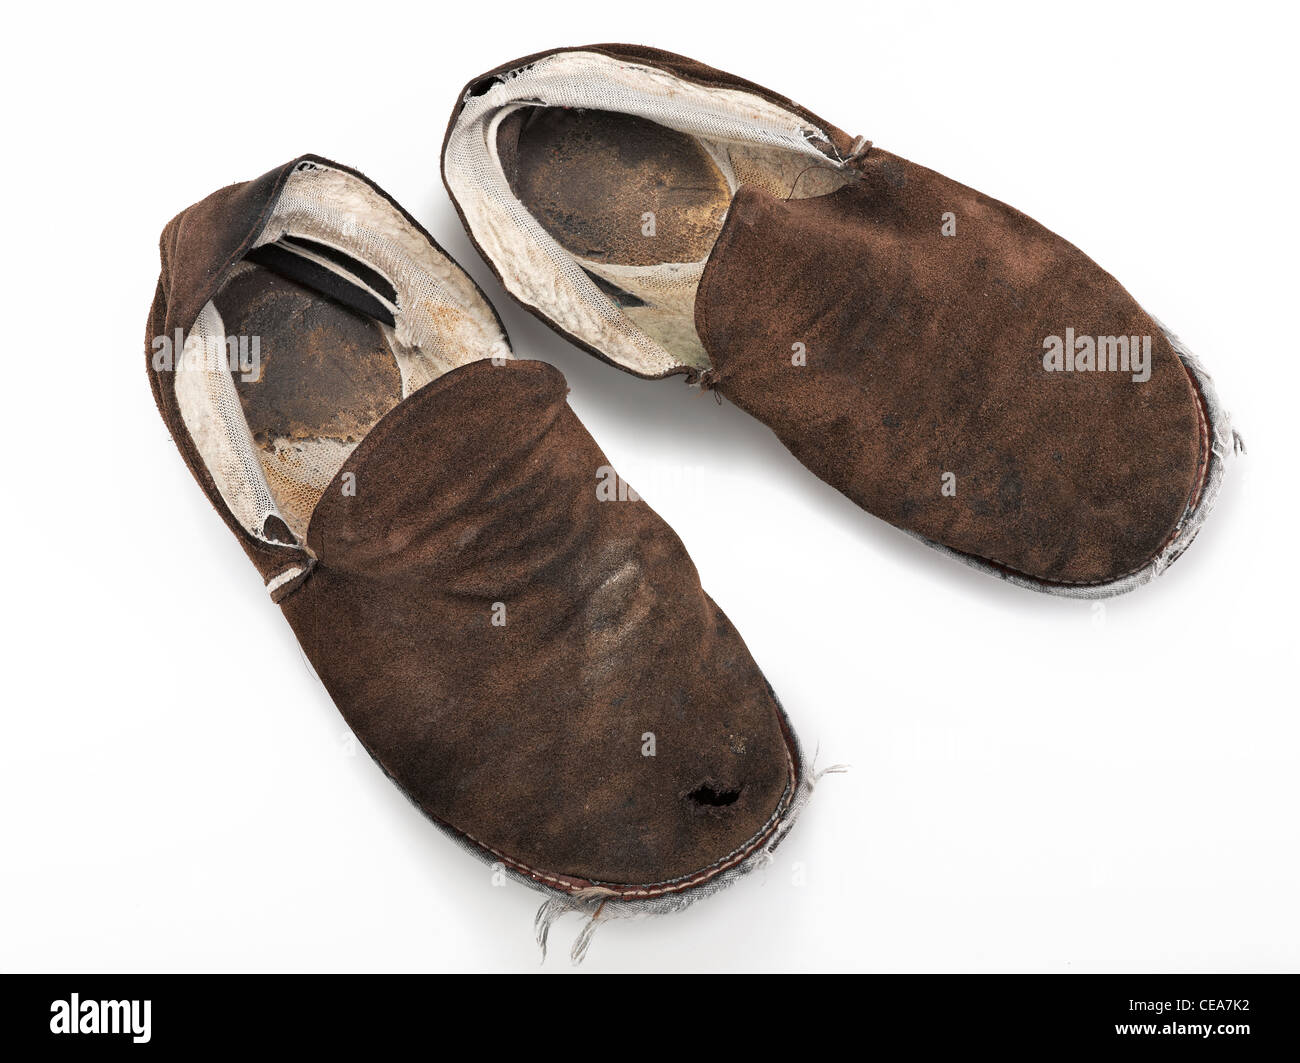 A pair of old, ratty house slippers on a white background Stock Photo -  Alamy